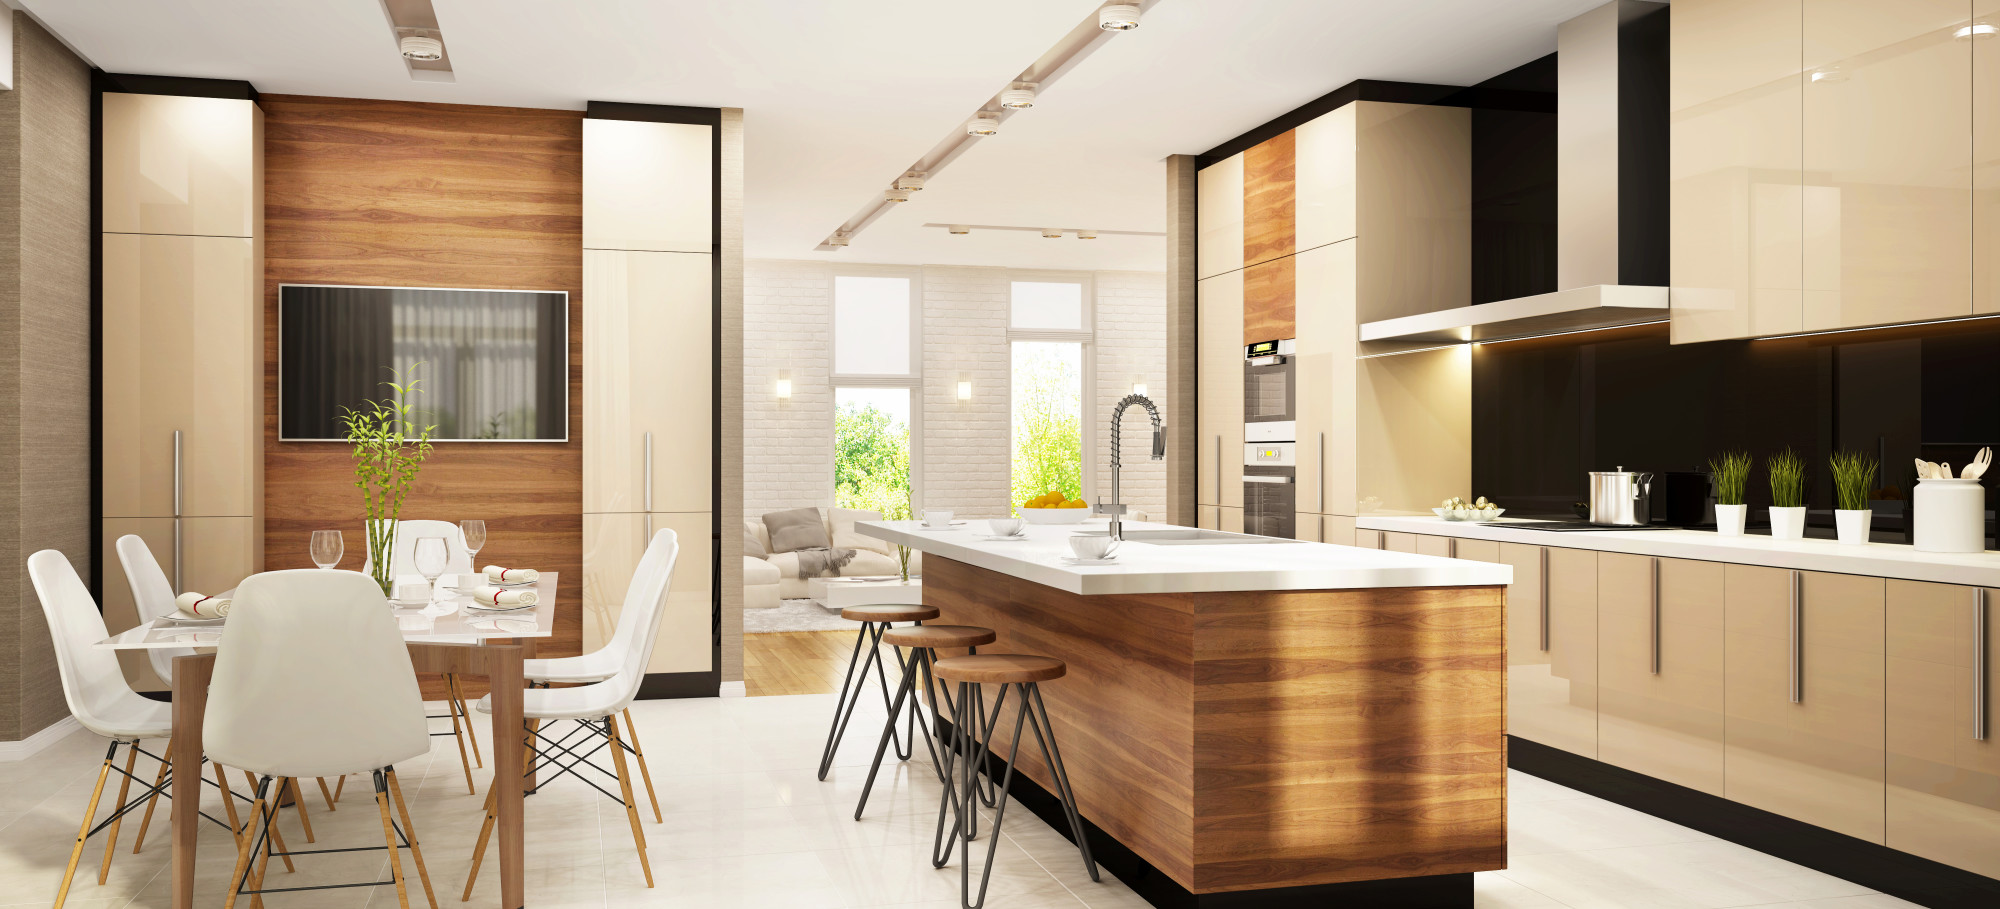 There are a few kitchen design tips that you should consider for your home renovations. Read this helpful guide to inspire your renovations.